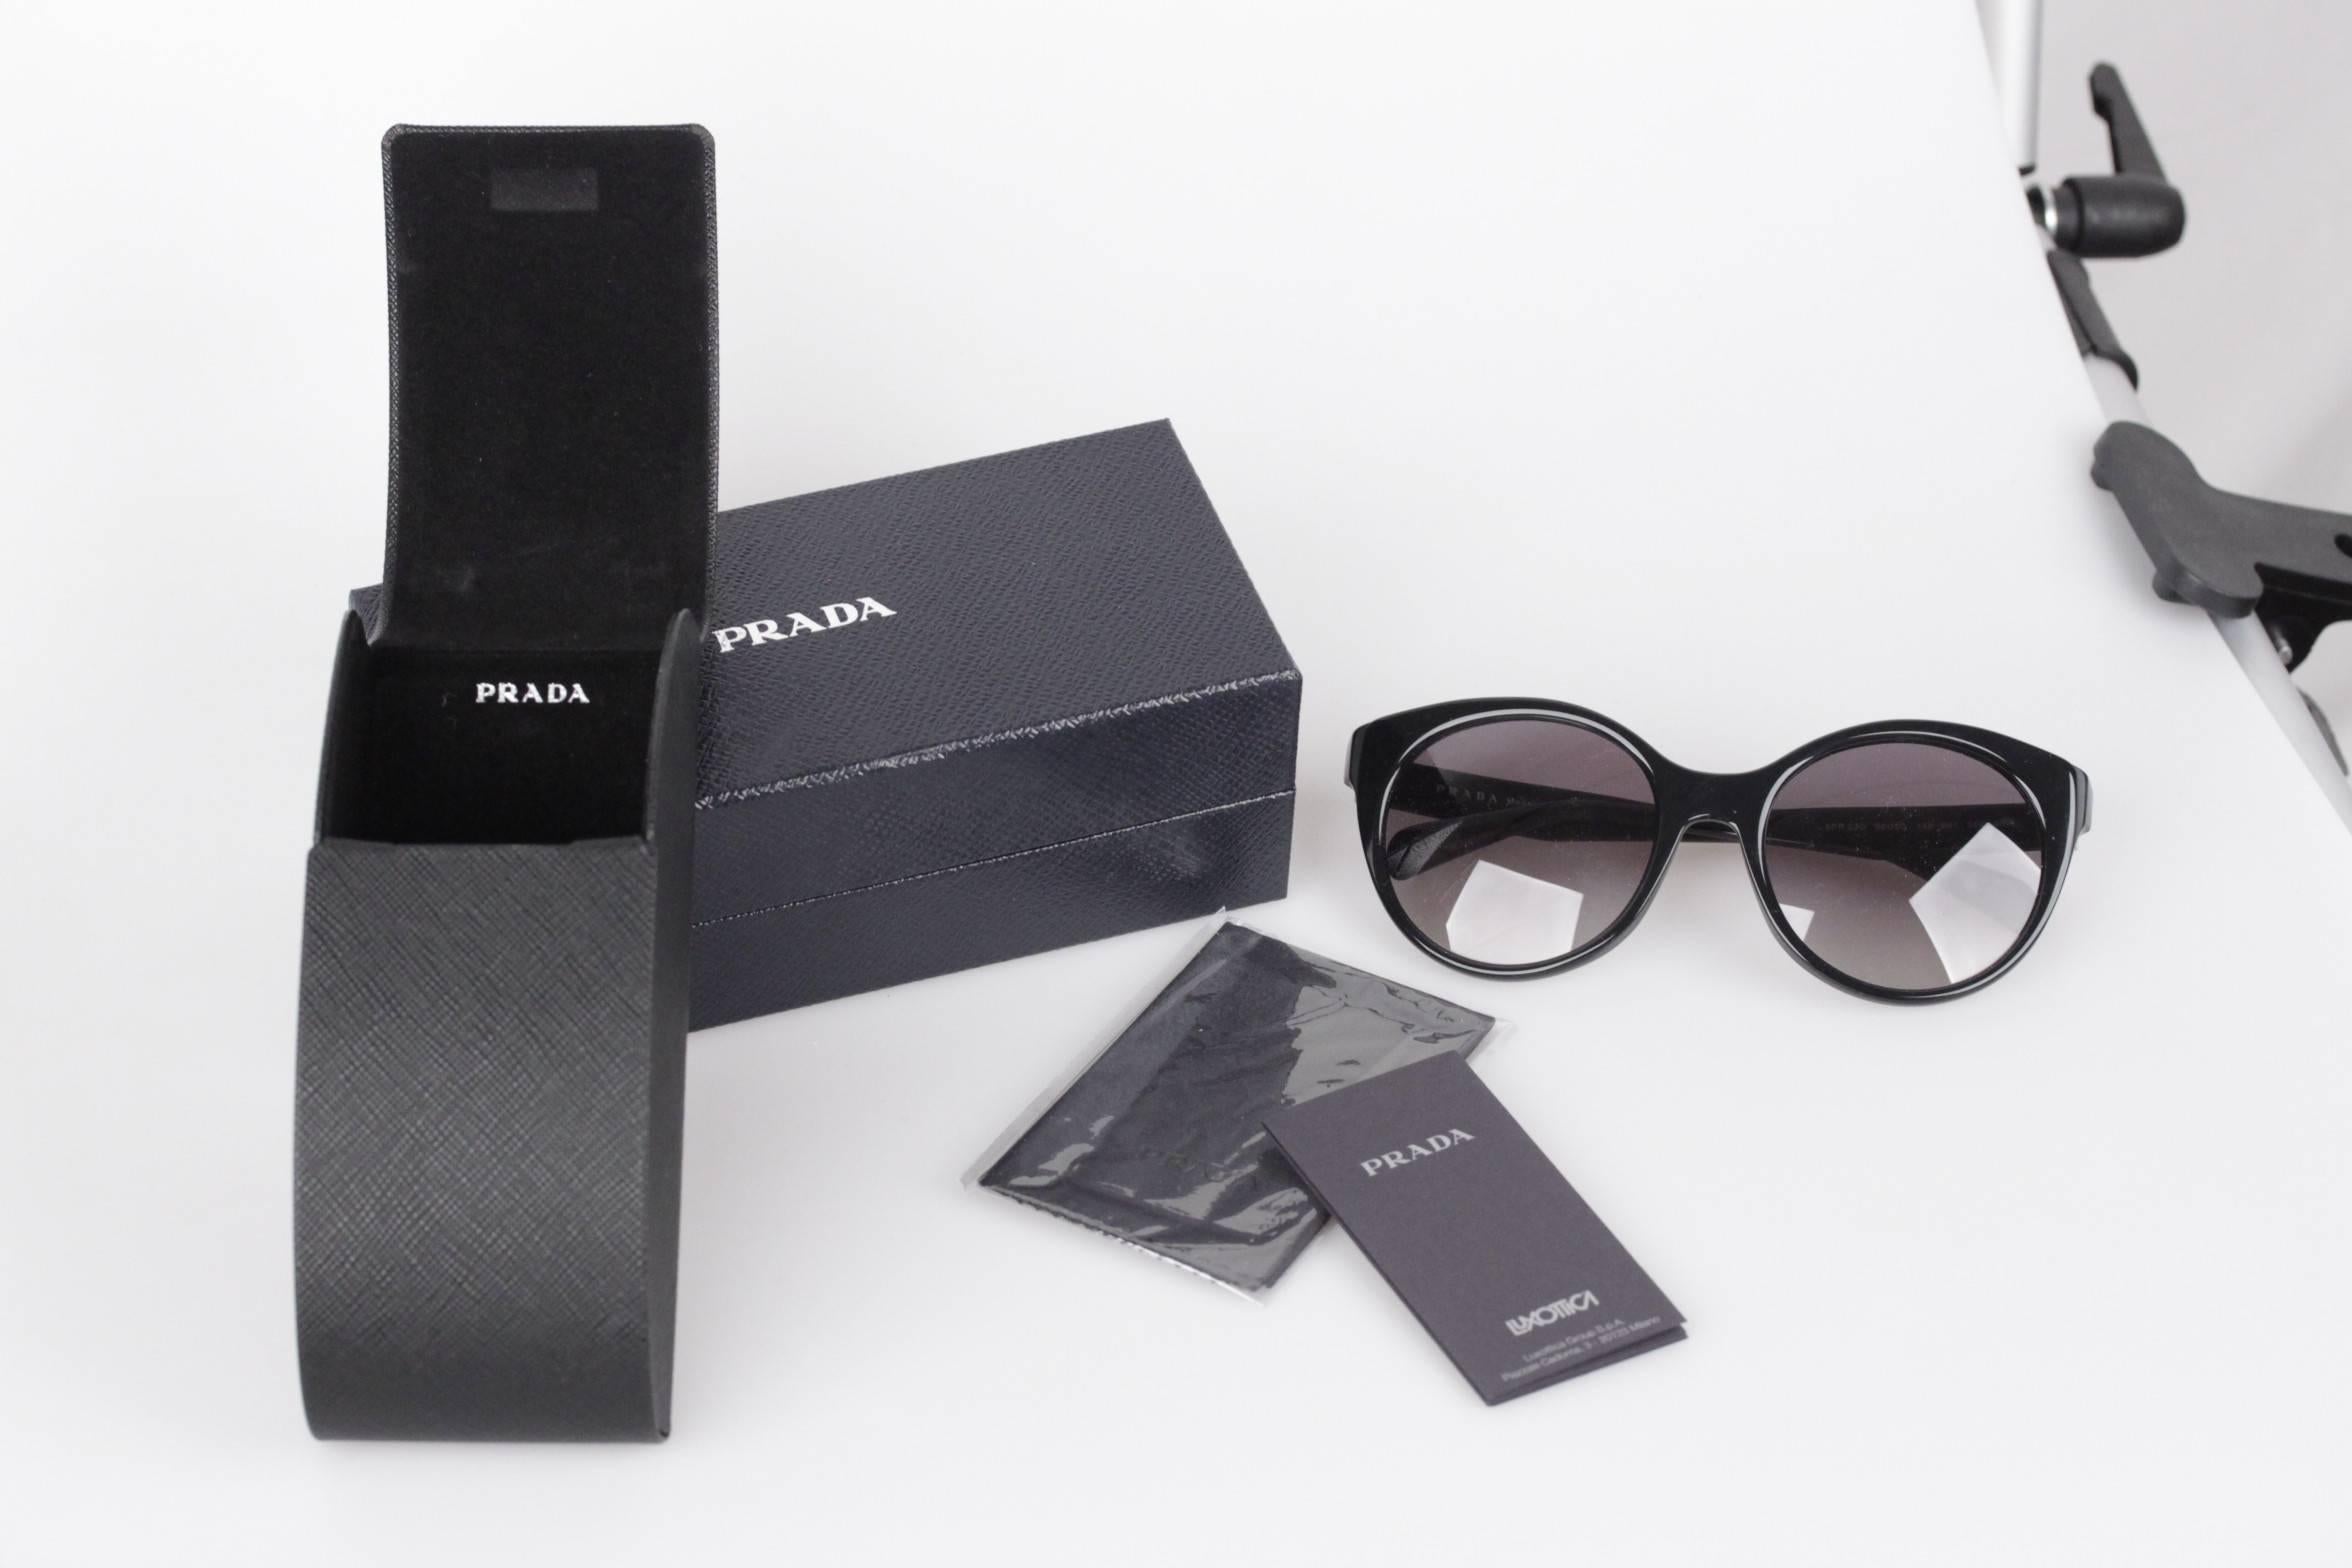 - PRADA sunglasses, made in Italy

- mod: SPR 230 - 56/20 - 1AB-3M1 - 140 - 2N

- Black ROUND CAT-EYE frame

- Retail Price + 250 USD

Condition: A+ :MINT CONDITION! Mint item. Never worn or used

Approx. measurements:

- TEMPLE LENGTH: